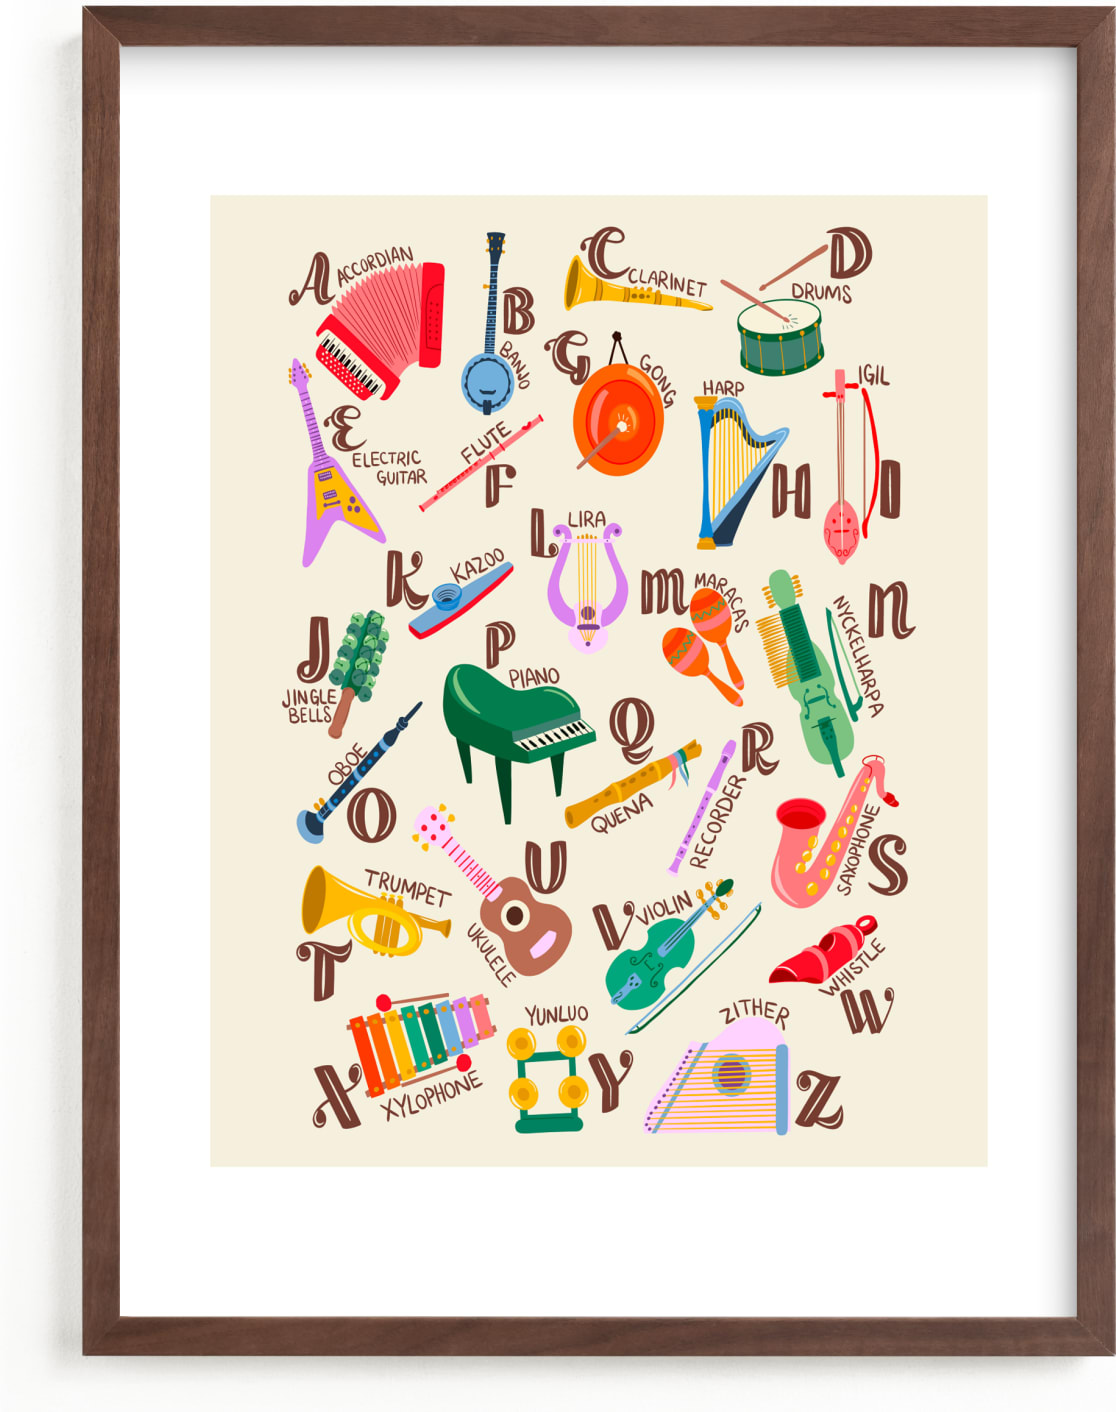 This is a colorful art by DorothyDear Creations called Musical Alphabet.